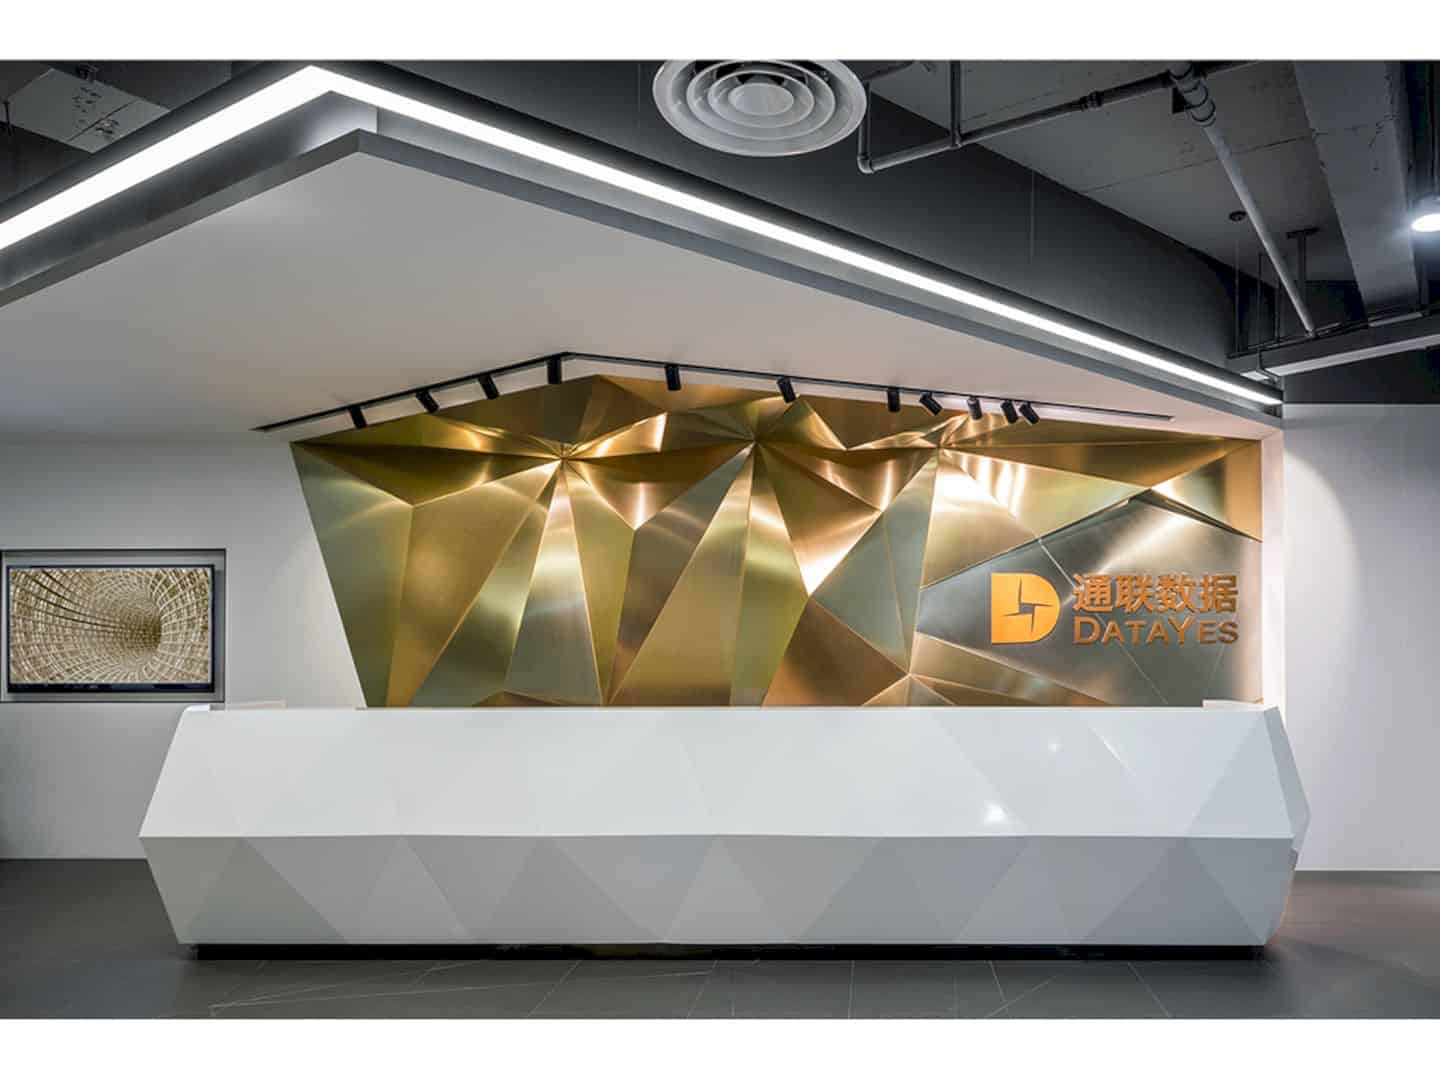 Datayes Office A Cutting Edge Internet Company With Fashionable Design 9